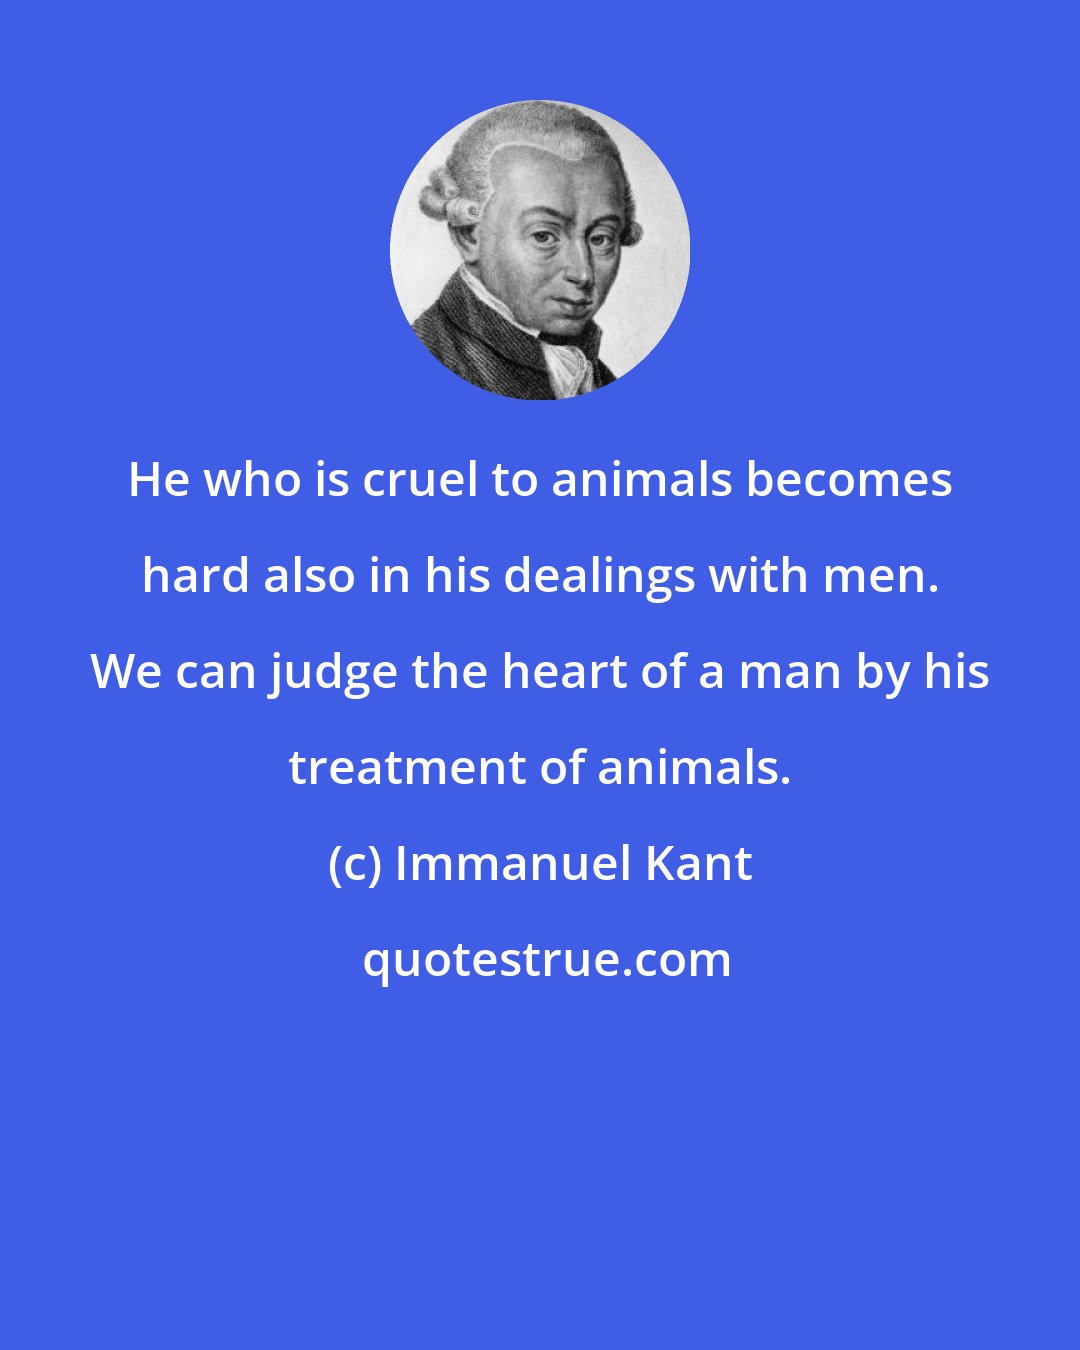 Immanuel Kant: He who is cruel to animals becomes hard also in his dealings with men. We can judge the heart of a man by his treatment of animals.